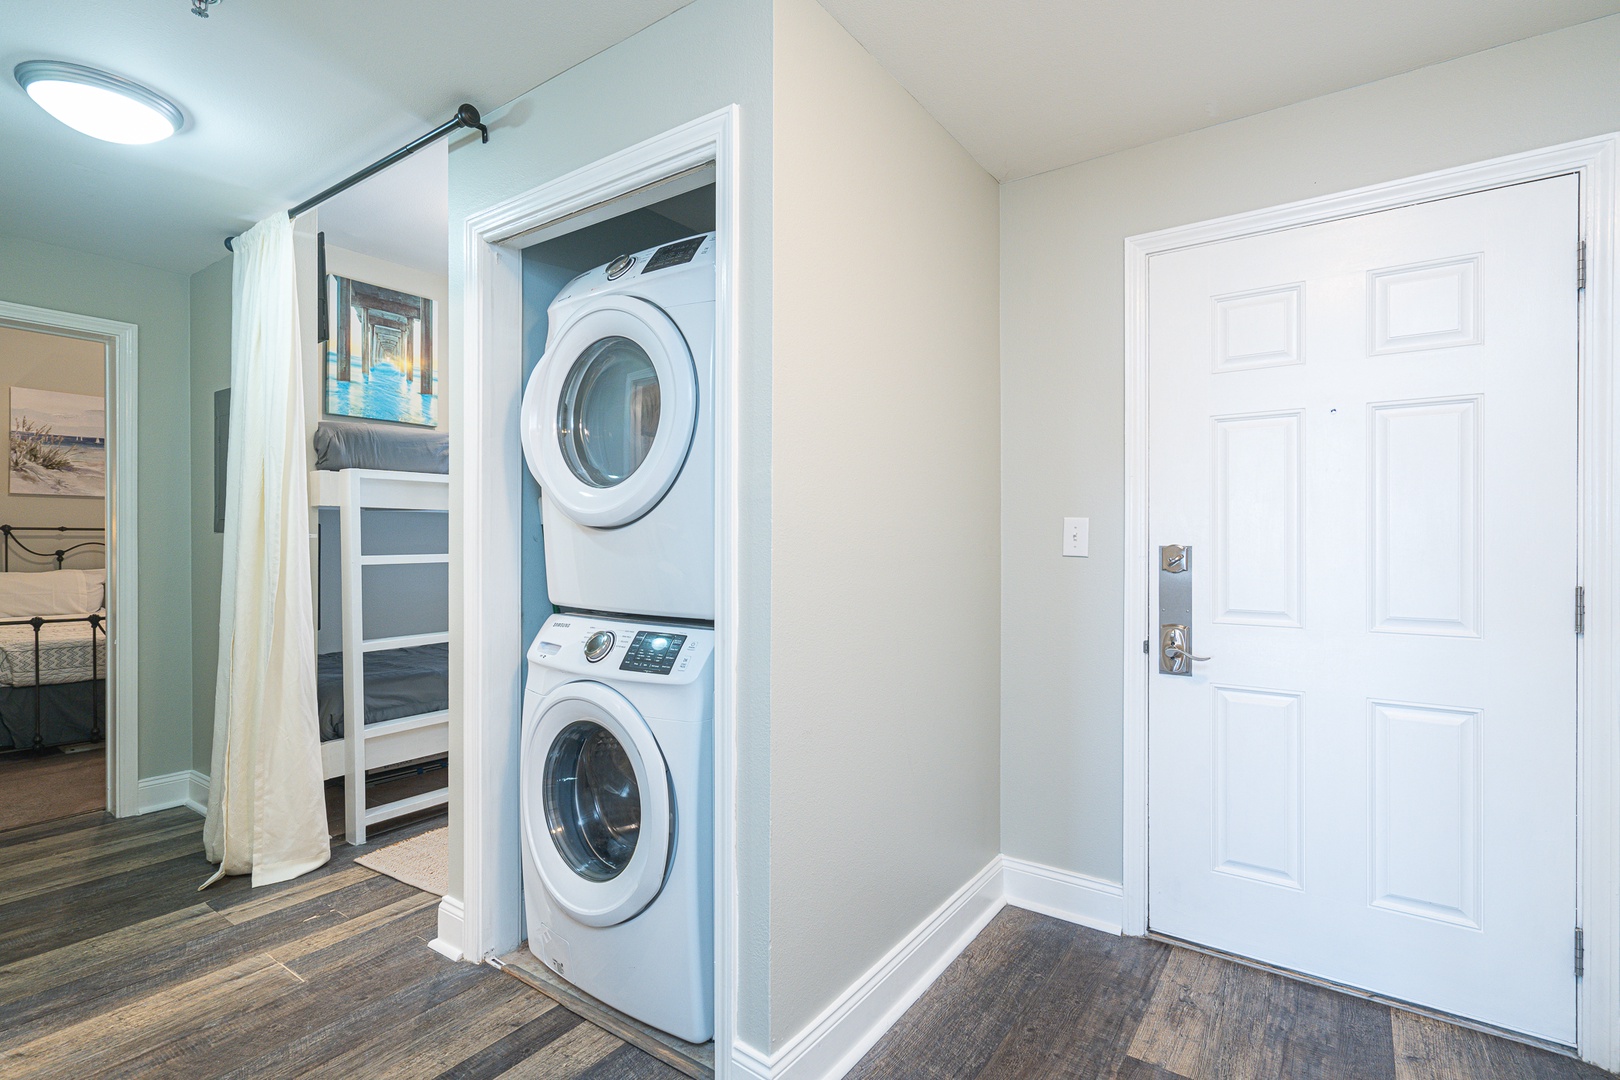 The entryway offers laundry & a snug sleeping nook for a warm welcome